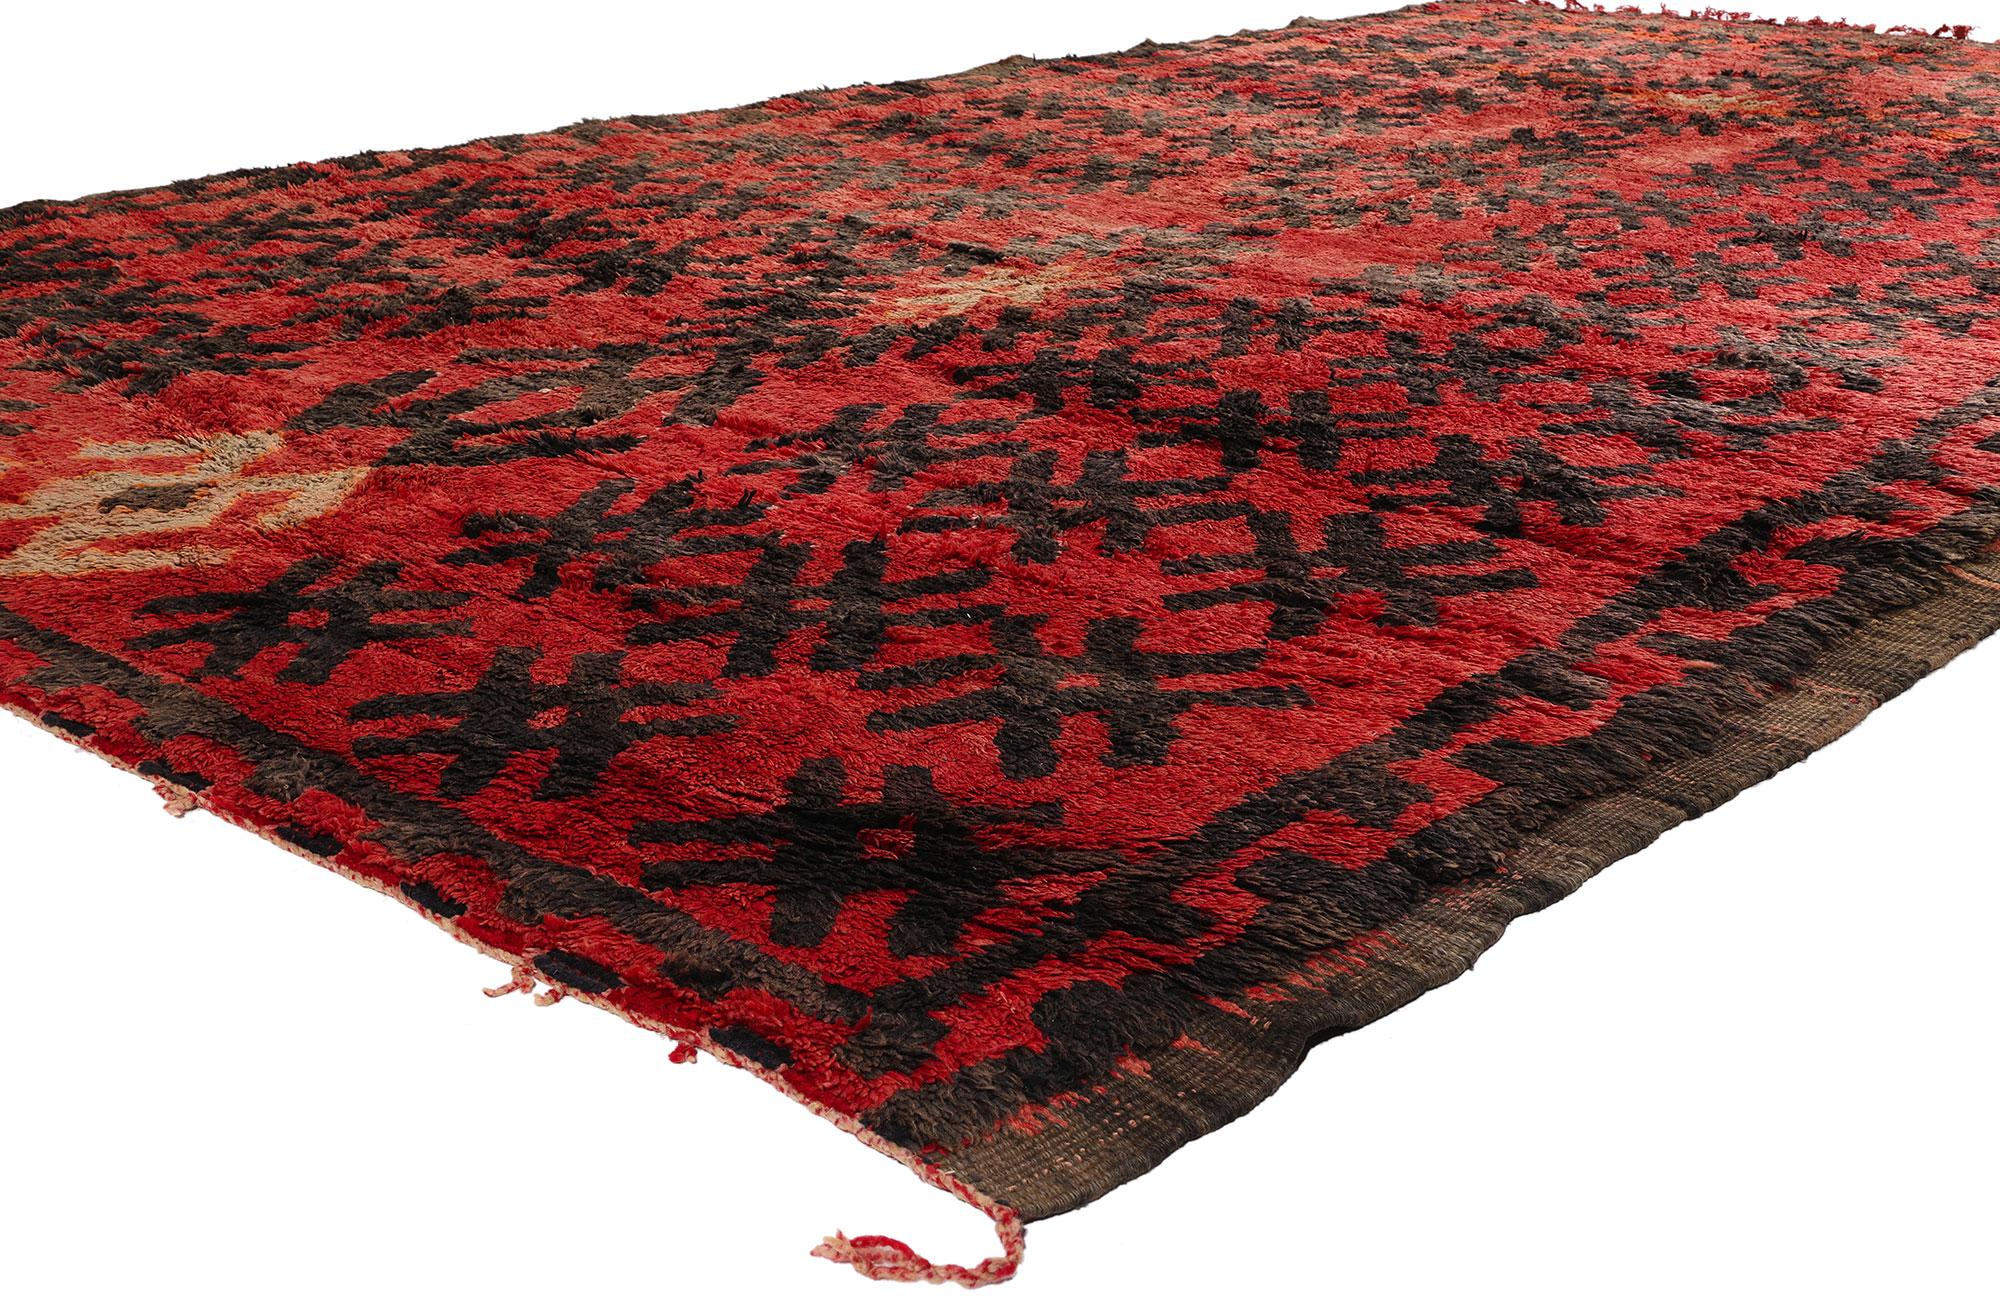 21468 Vintage Red Talsint Moroccan Rug, 06'10 x 12'08. A Talsint rug, also referred to as Talsint carpet or Talsint tribal rug, is a Moroccan rug originating from the Talsint region in the eastern part of the High Atlas Mountains. Crafted by Berber